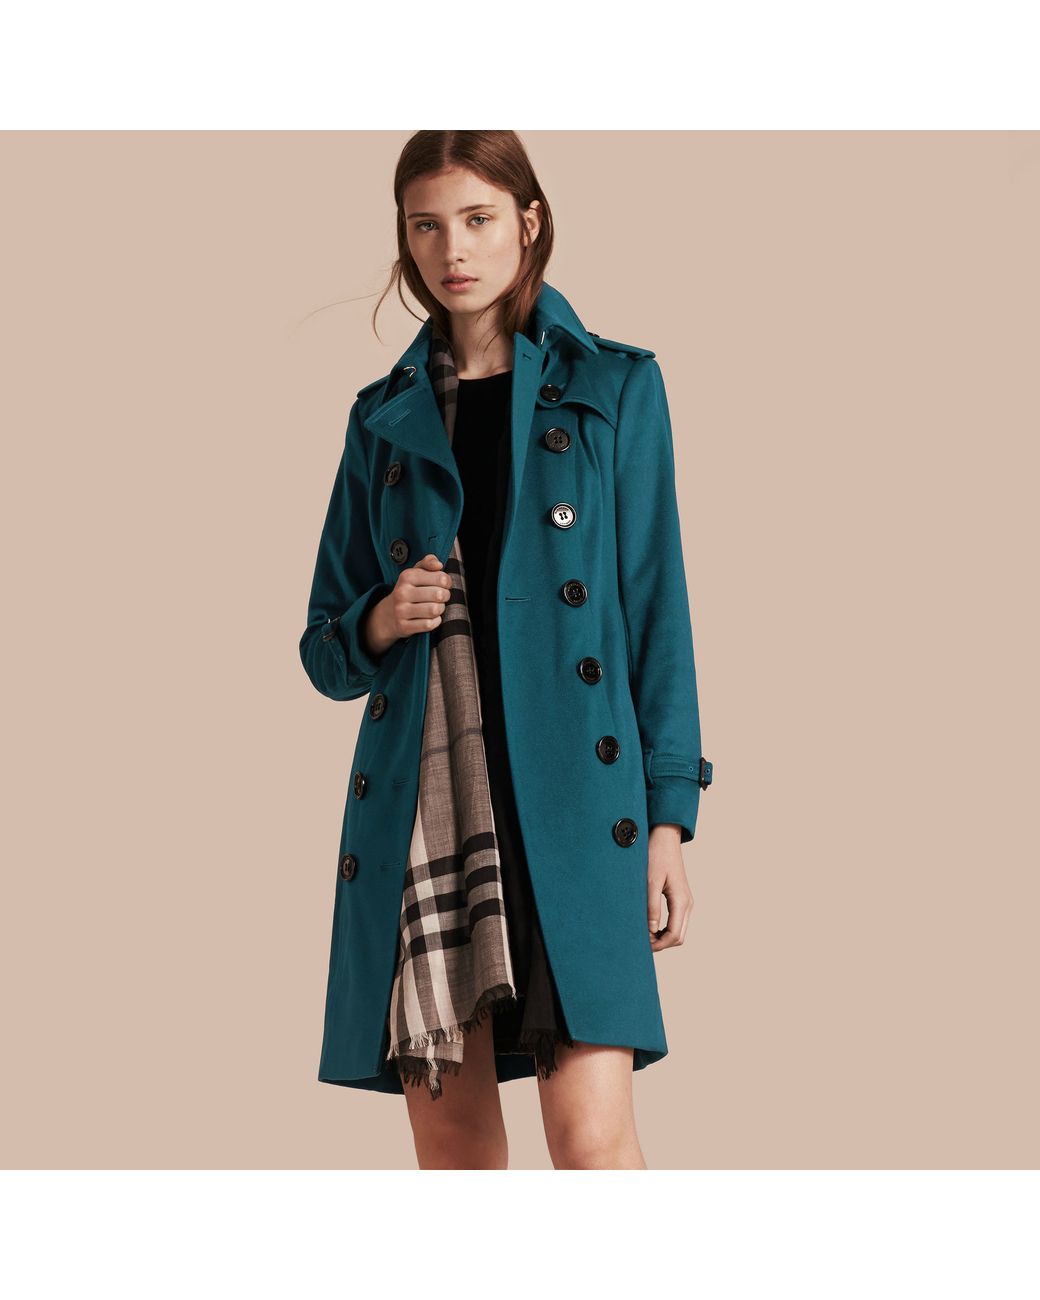 Burberry Sandringham Fit Cashmere Trench Coat Teal in Blue | Lyst